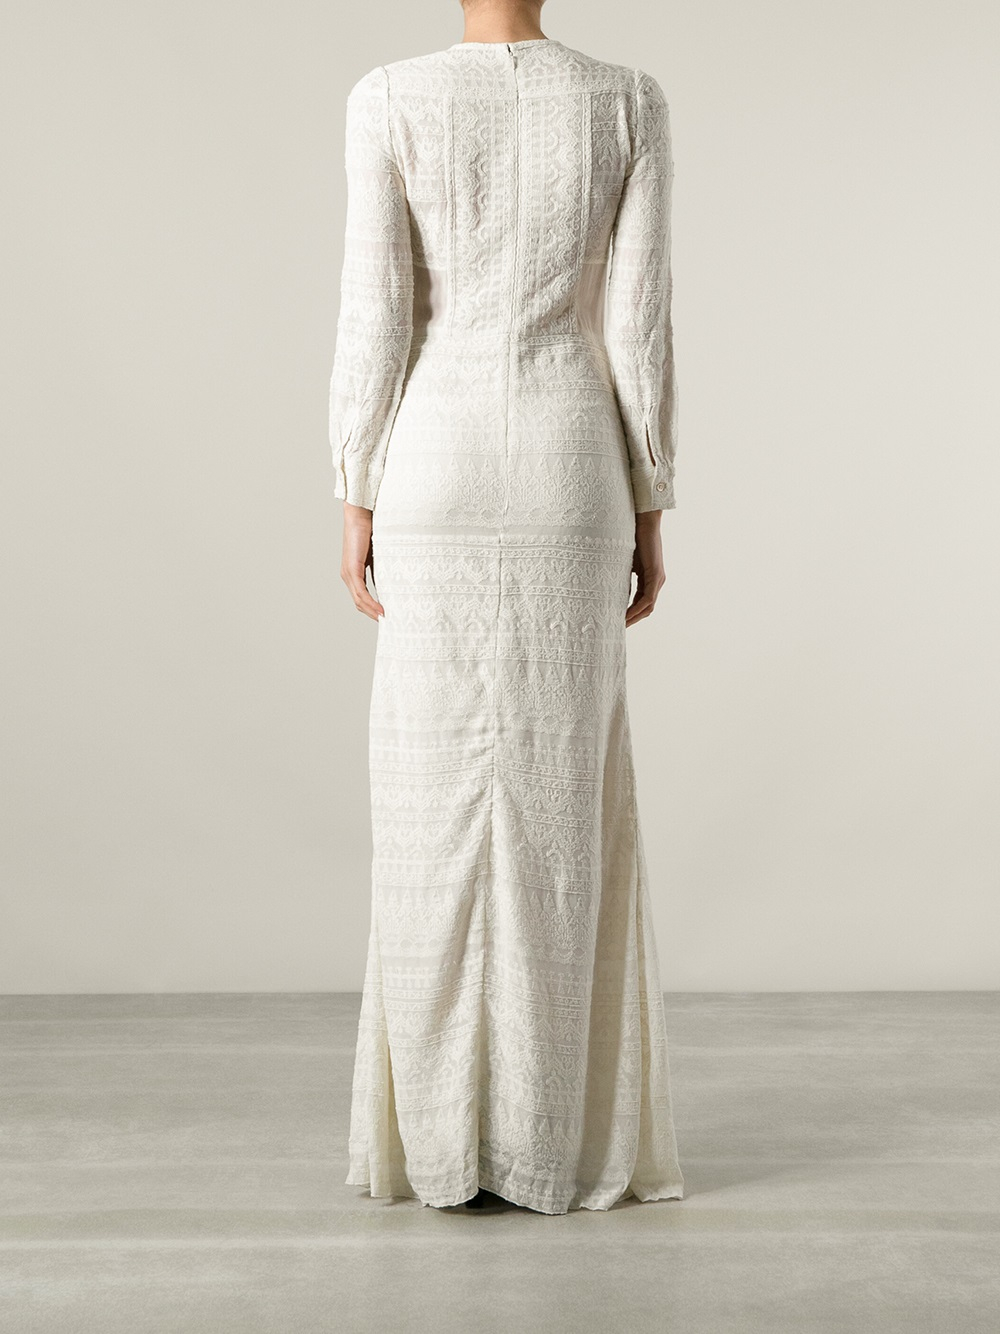 Isabel Marant Embroidered Pattern Dress in White - Lyst